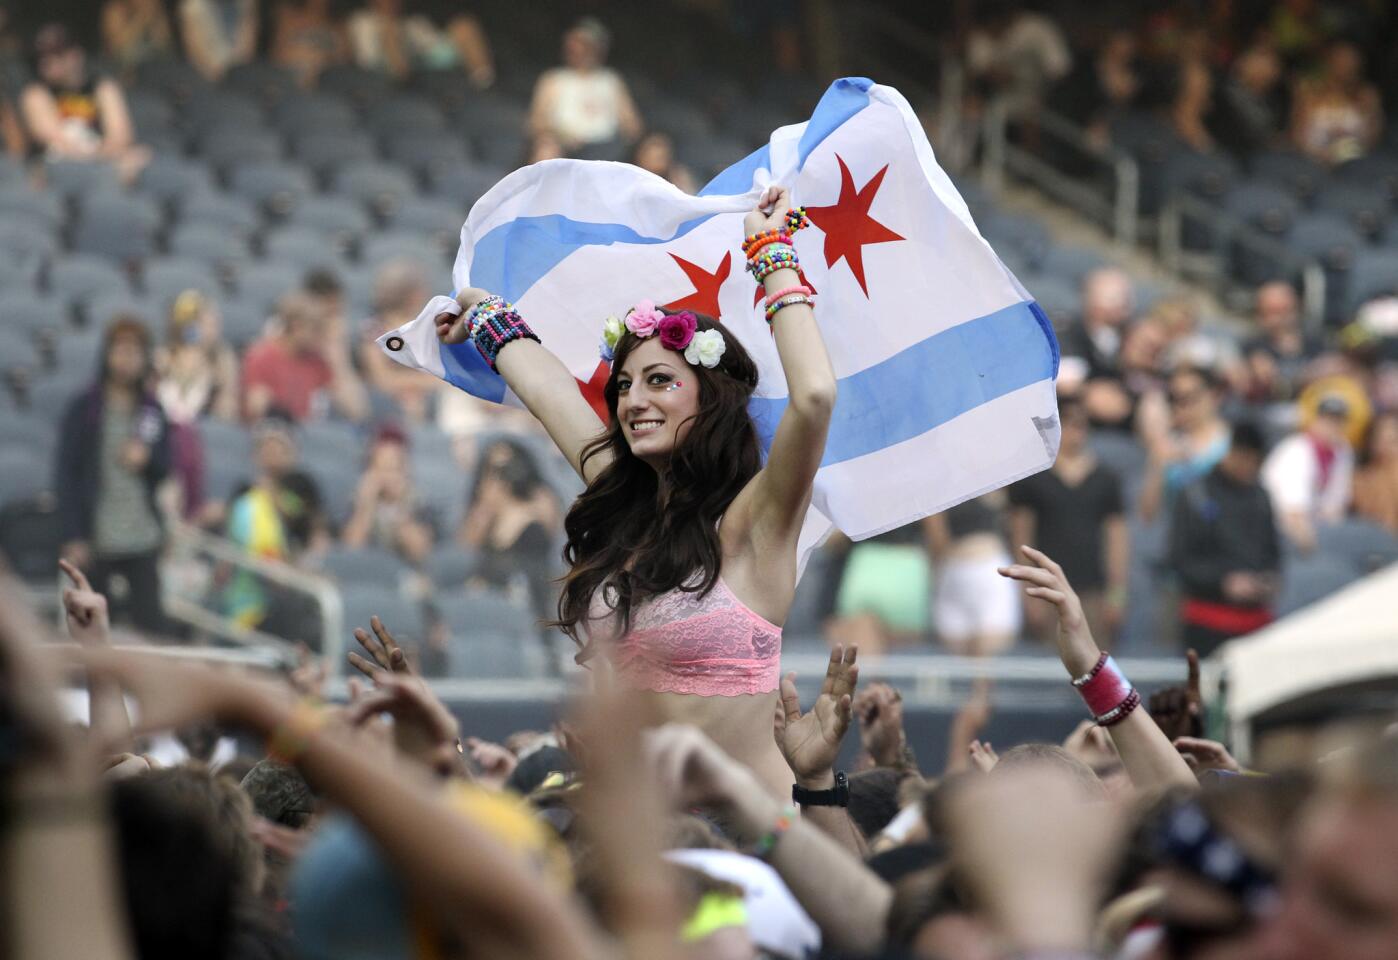 Music fans dance at Spring Awakening, a three-day electronic dance music festival, held at Soldier Field in Chicago.